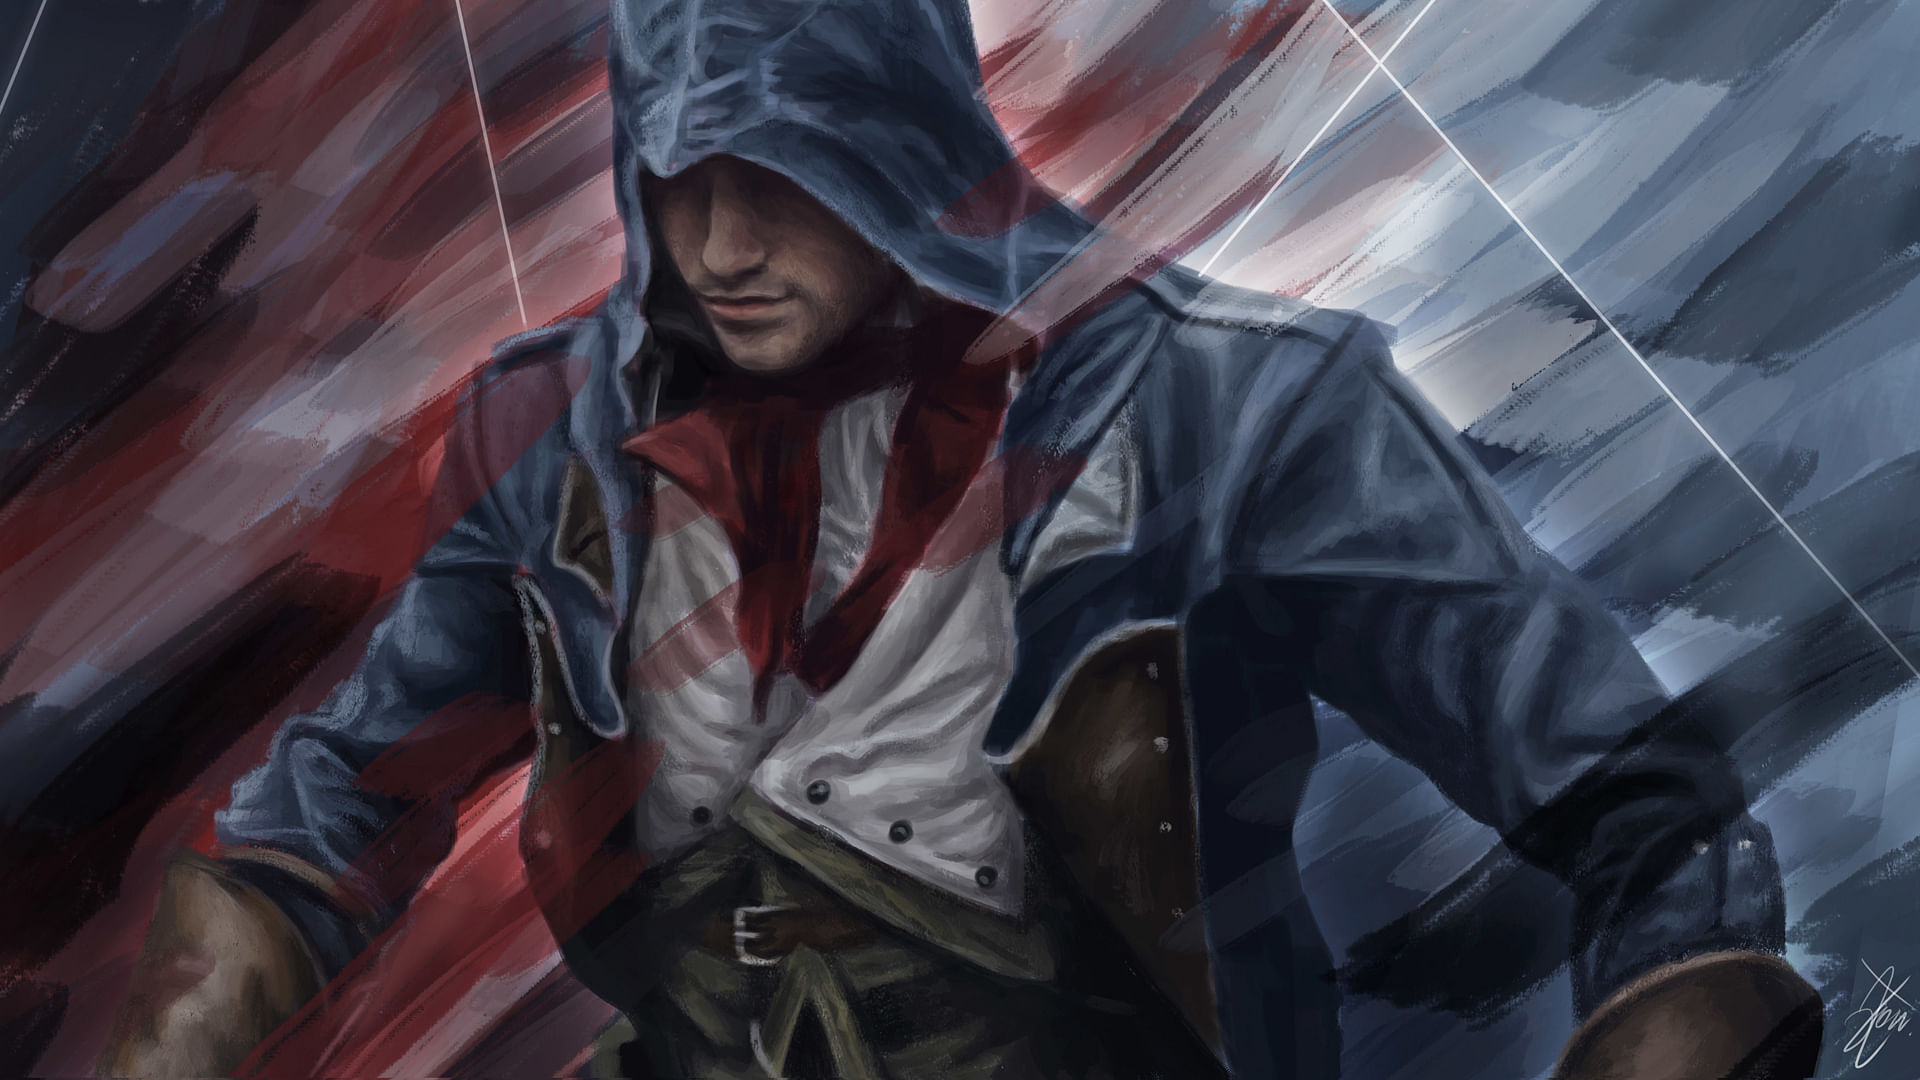 Assassins creed Unity releases worldwide on November 2014